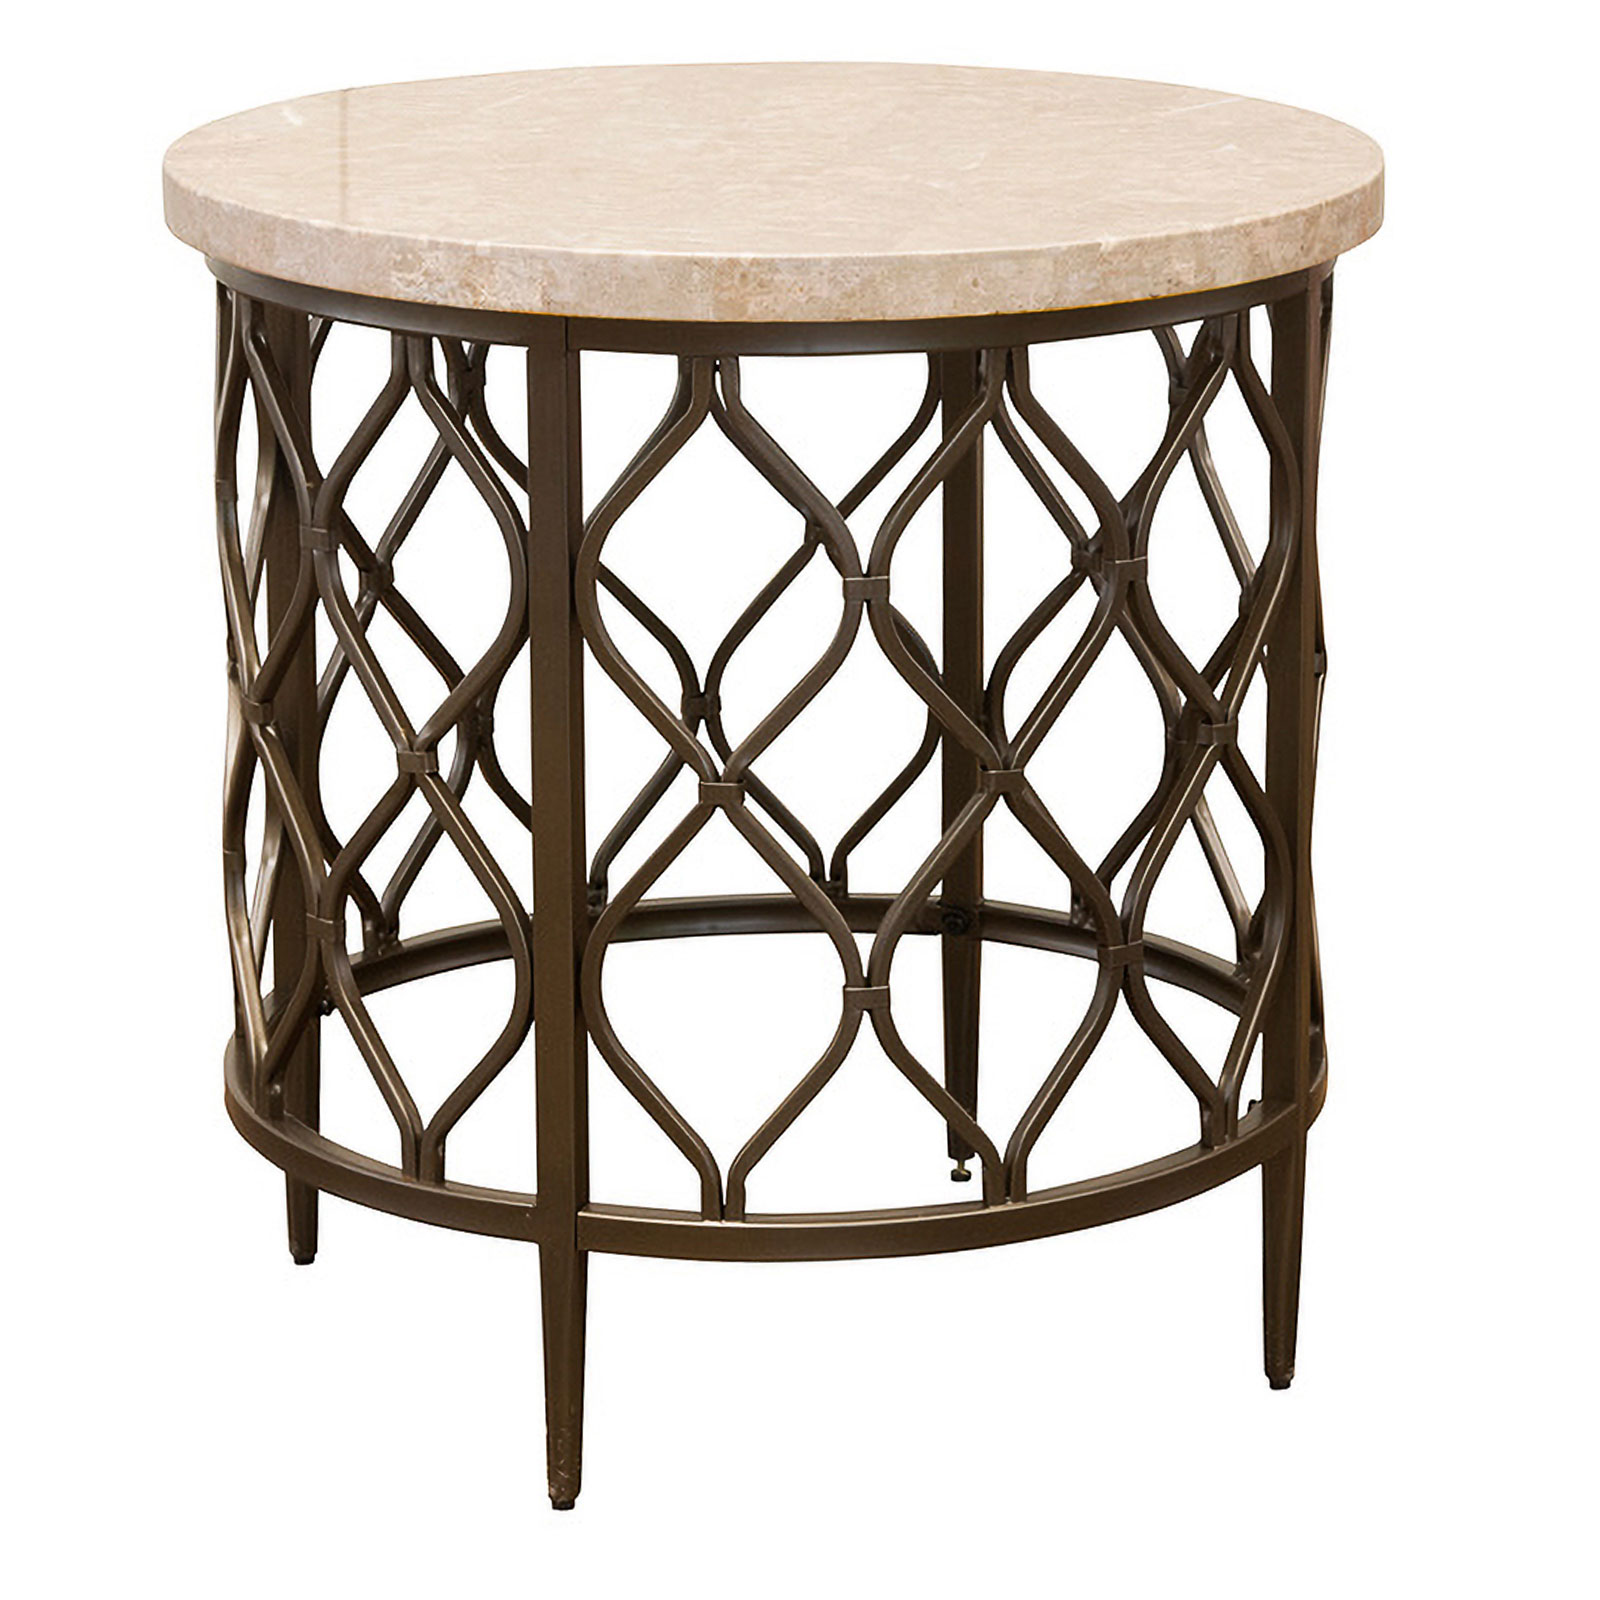 Round stone accent table